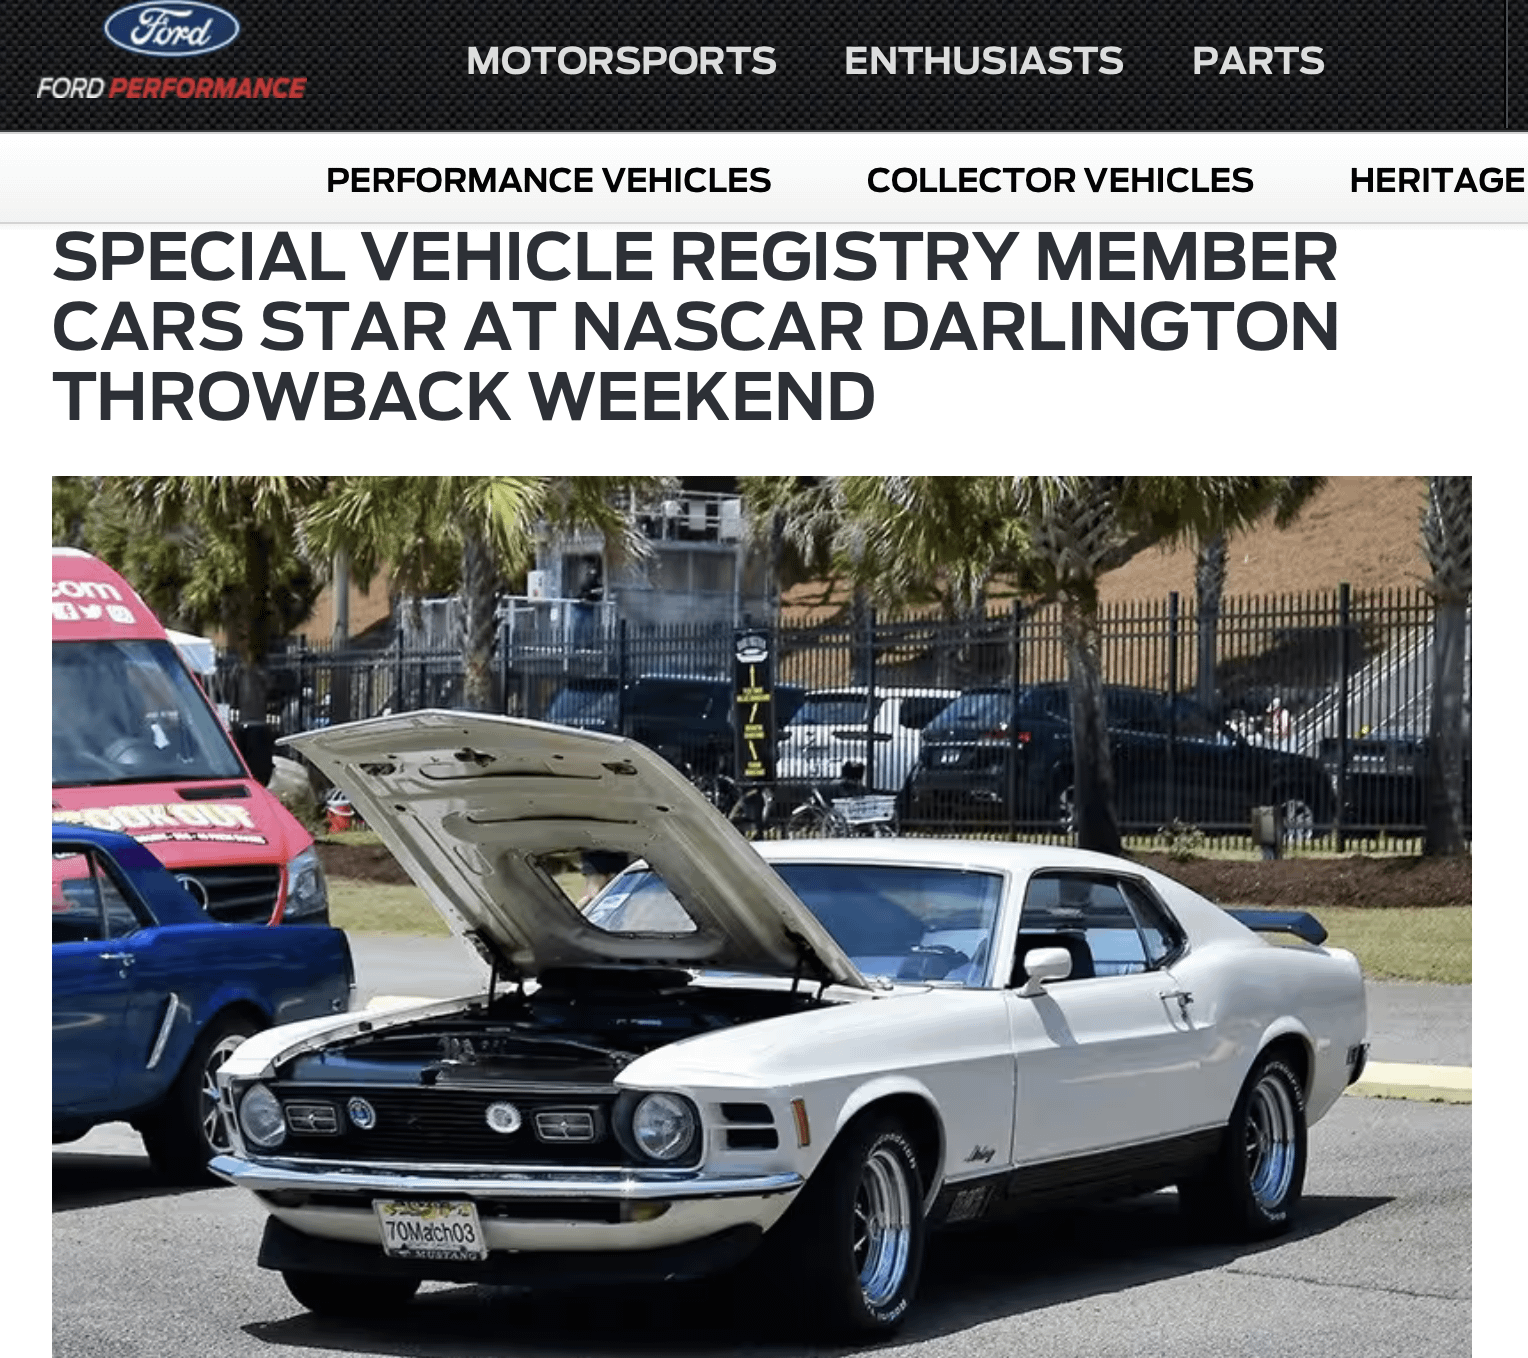 S650 Mustang Feature your Mustang in Ford's Special Vehicle Registry ords-special-vehicle-registry-v0-cn3e3us6n5wb1-